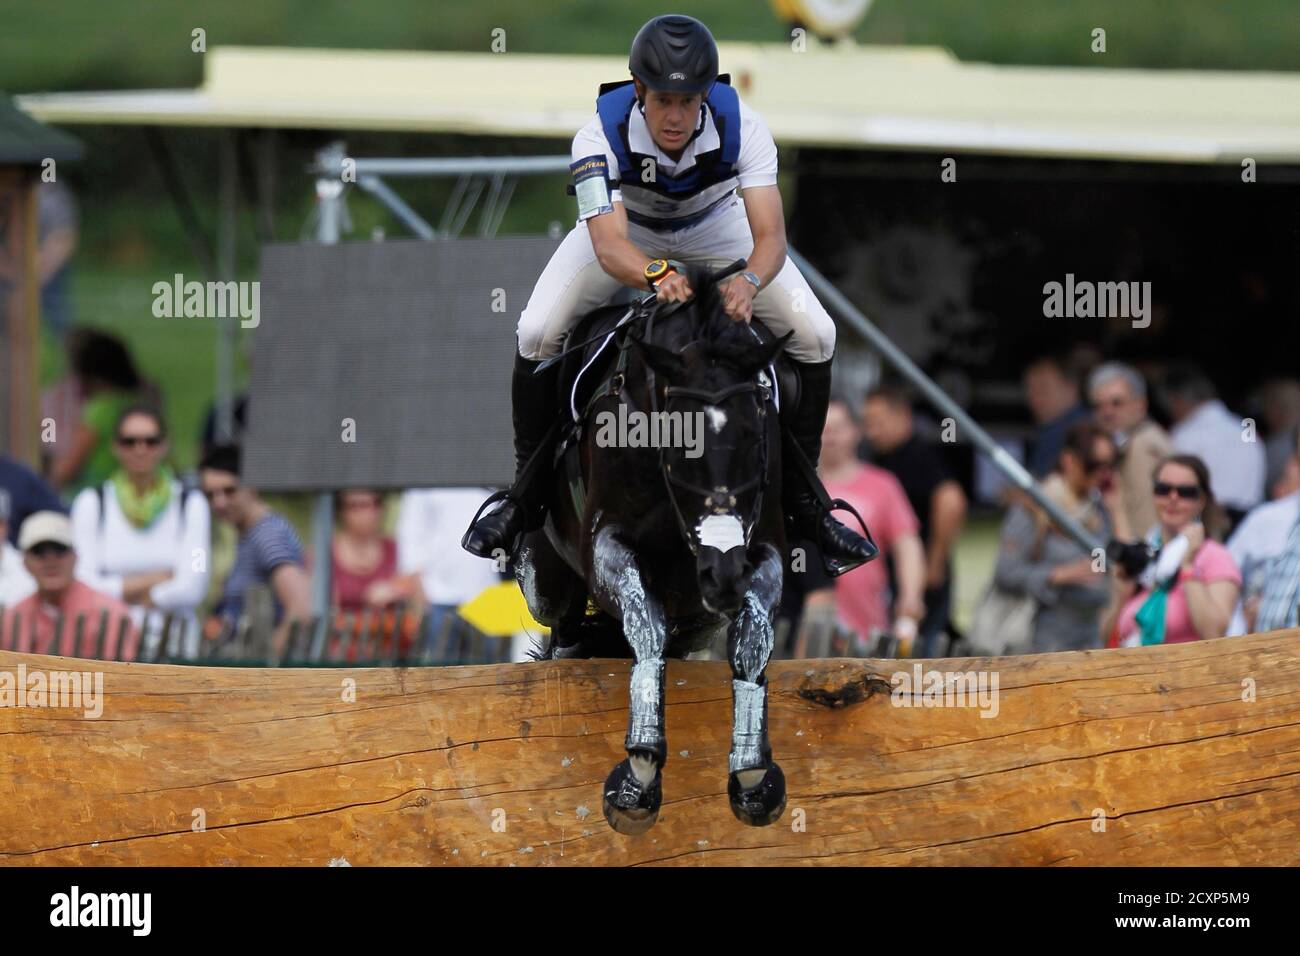 Christopher Burton of Australia clears a jump on his horse,  Underdiscussion, during the Cross Country Test of the World Equestrian  Festival CHIO in Aachen July 7, 2012. REUTERS/Alex Domanski (GERMANY - Tags: